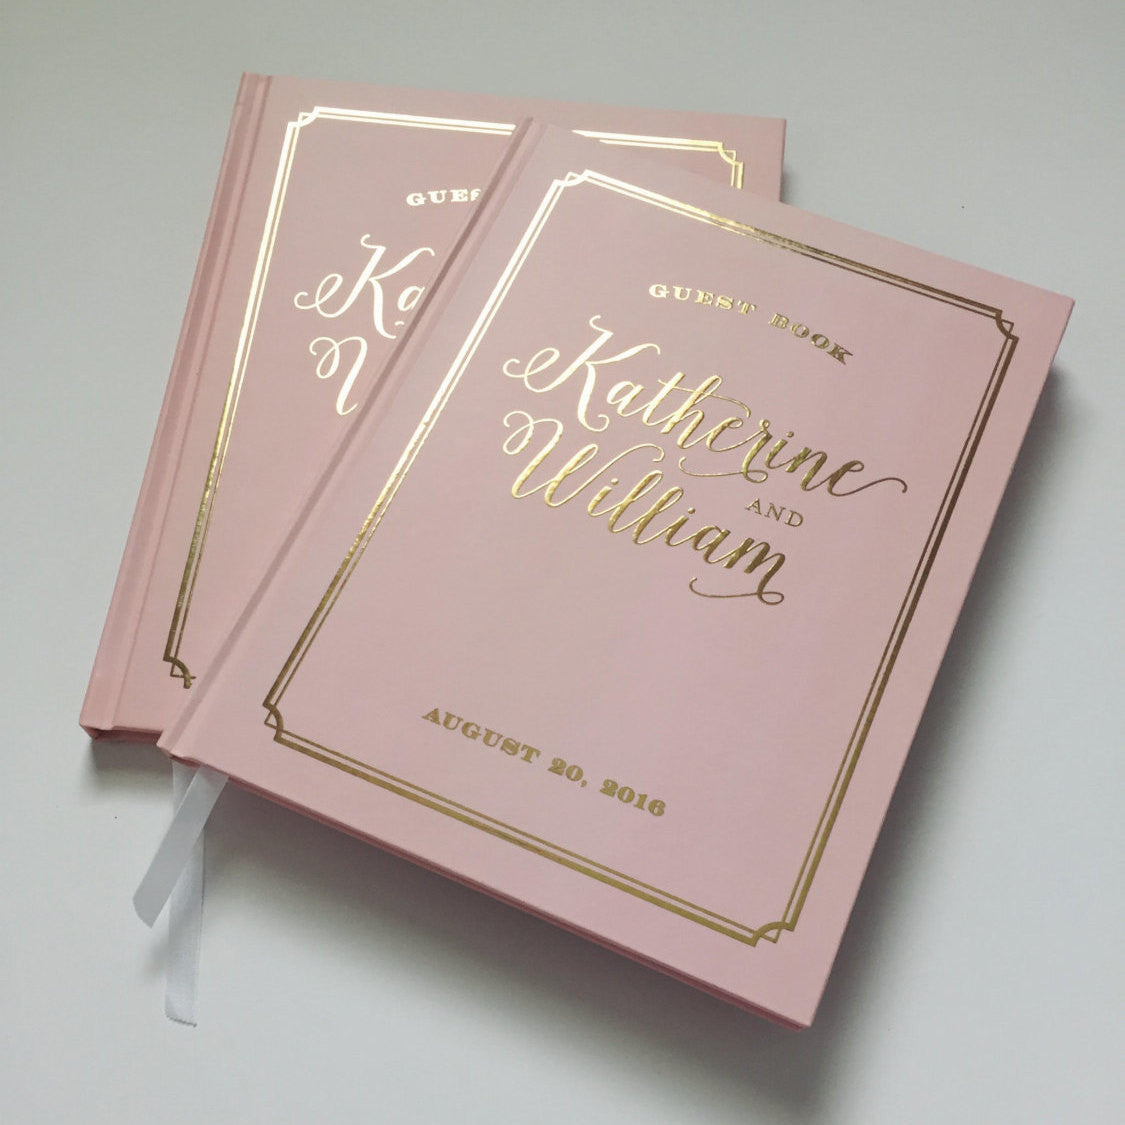 Blush and Real Gold Foil Wedding Guest Book